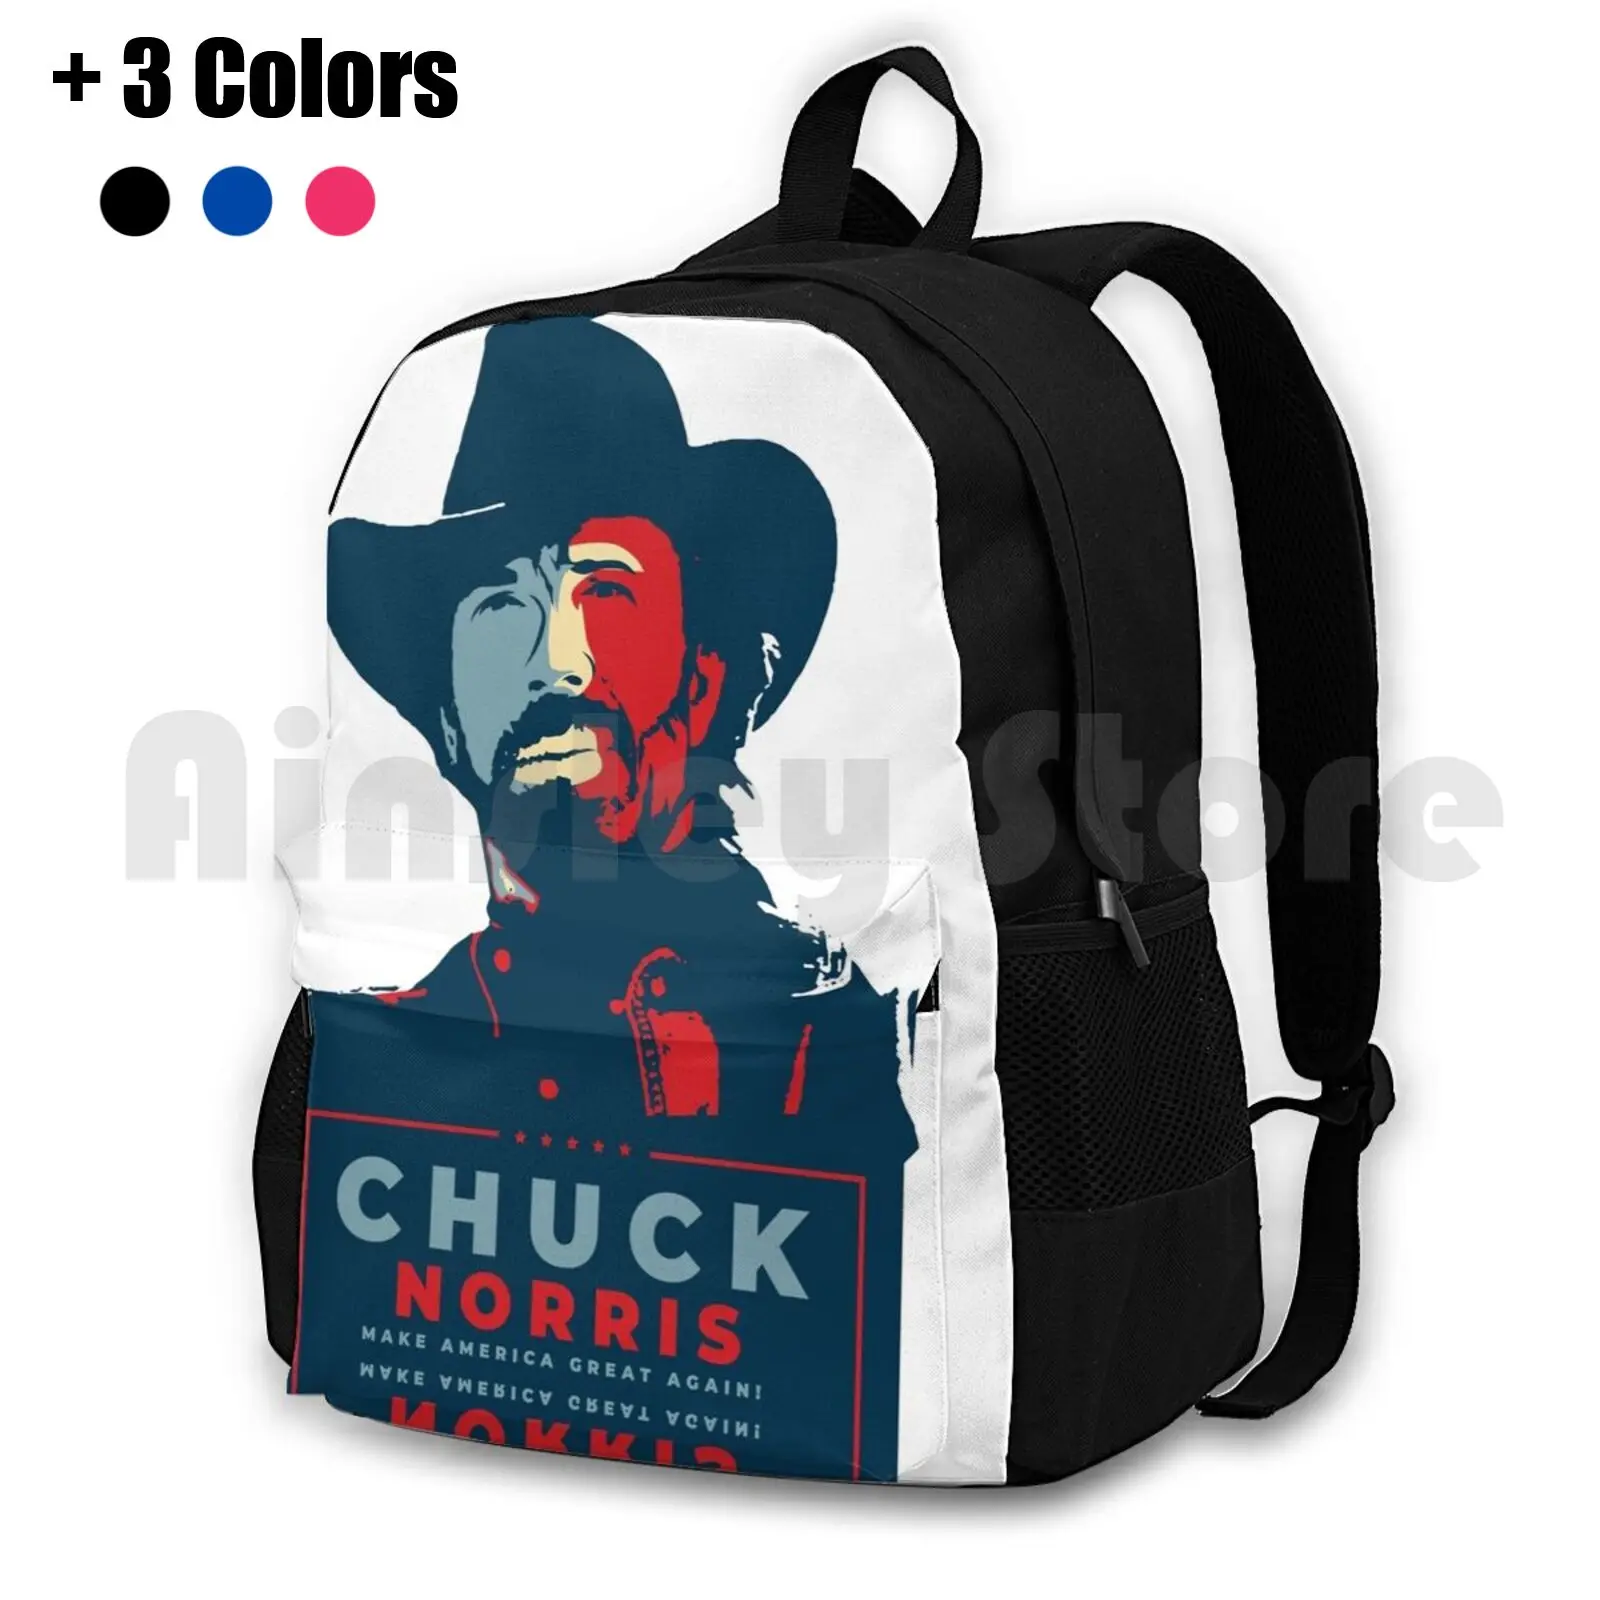 

Chuck Norris-Make America Even Greater! 2020-2020 Usa Election-Election Humor-Chuck Norris For President Outdoor Hiking